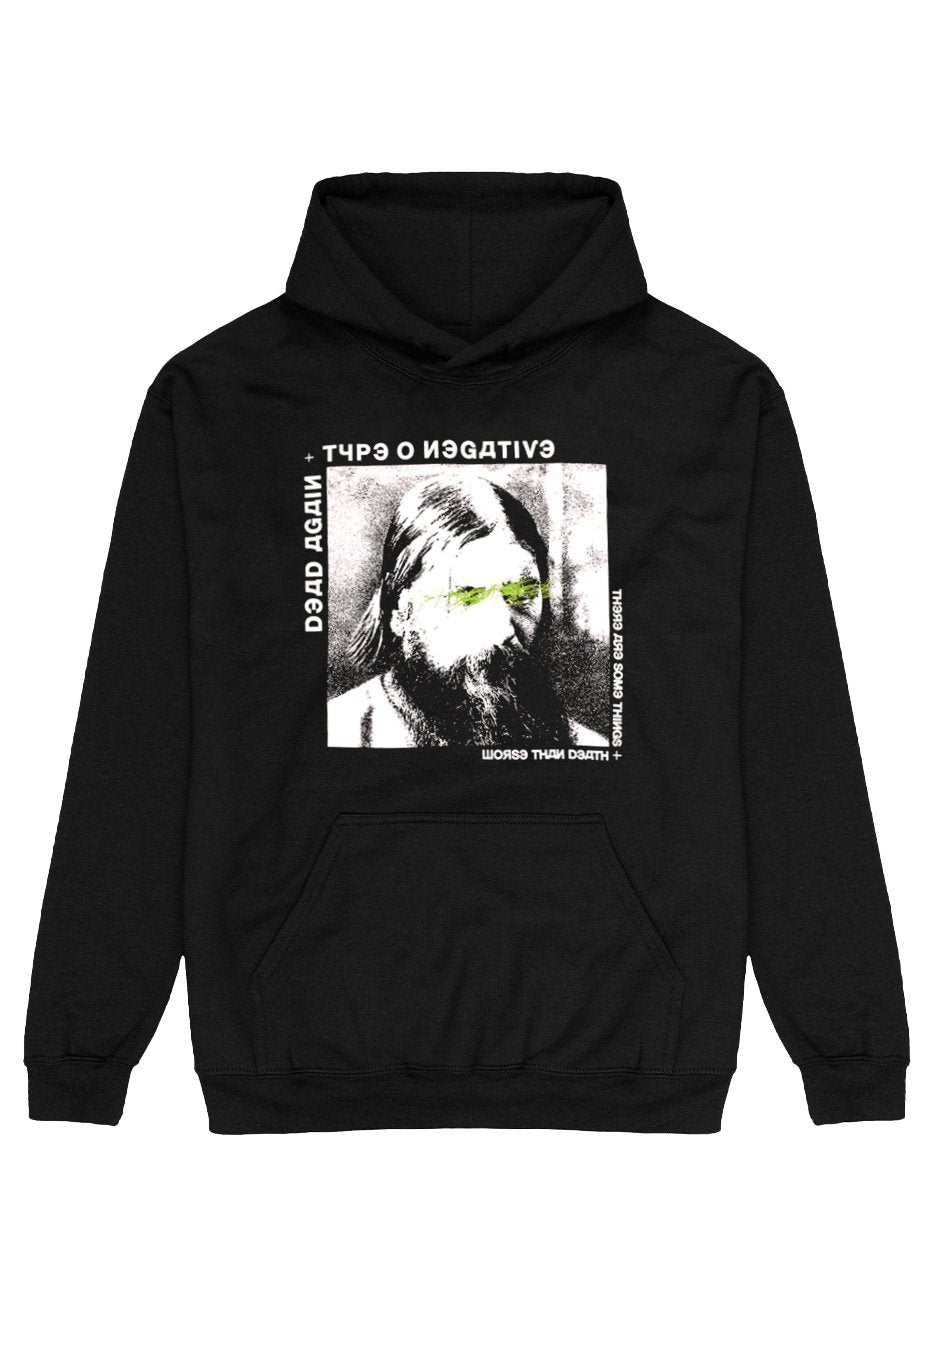 Type O Negative - Worse Than Death - Hoodie